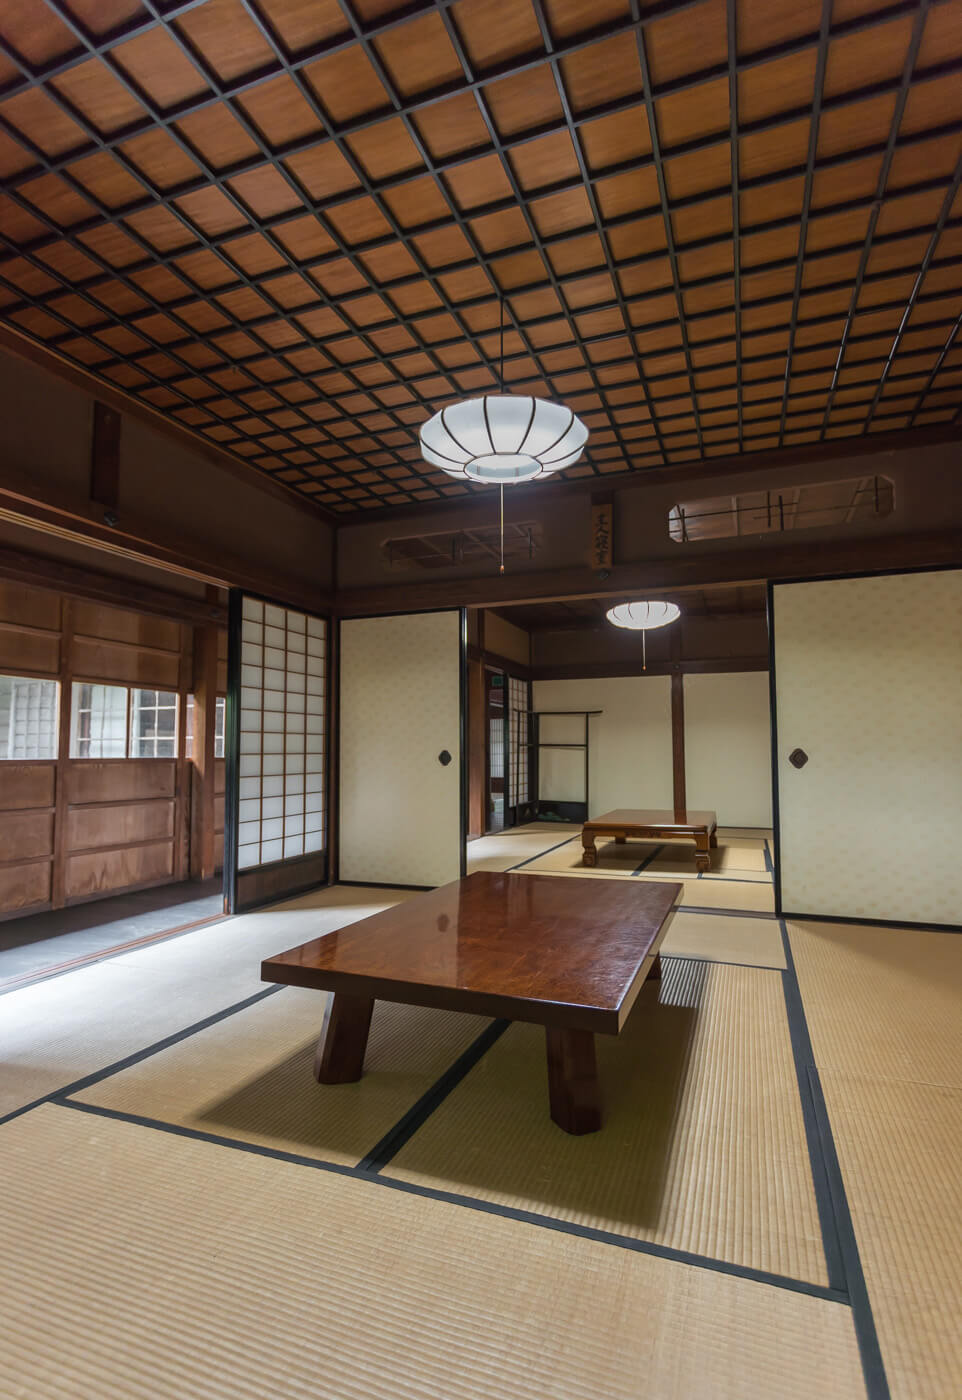 Tokeien is the branch of Watanabe’s house with wooden tiled Japanese tiled-roofed building